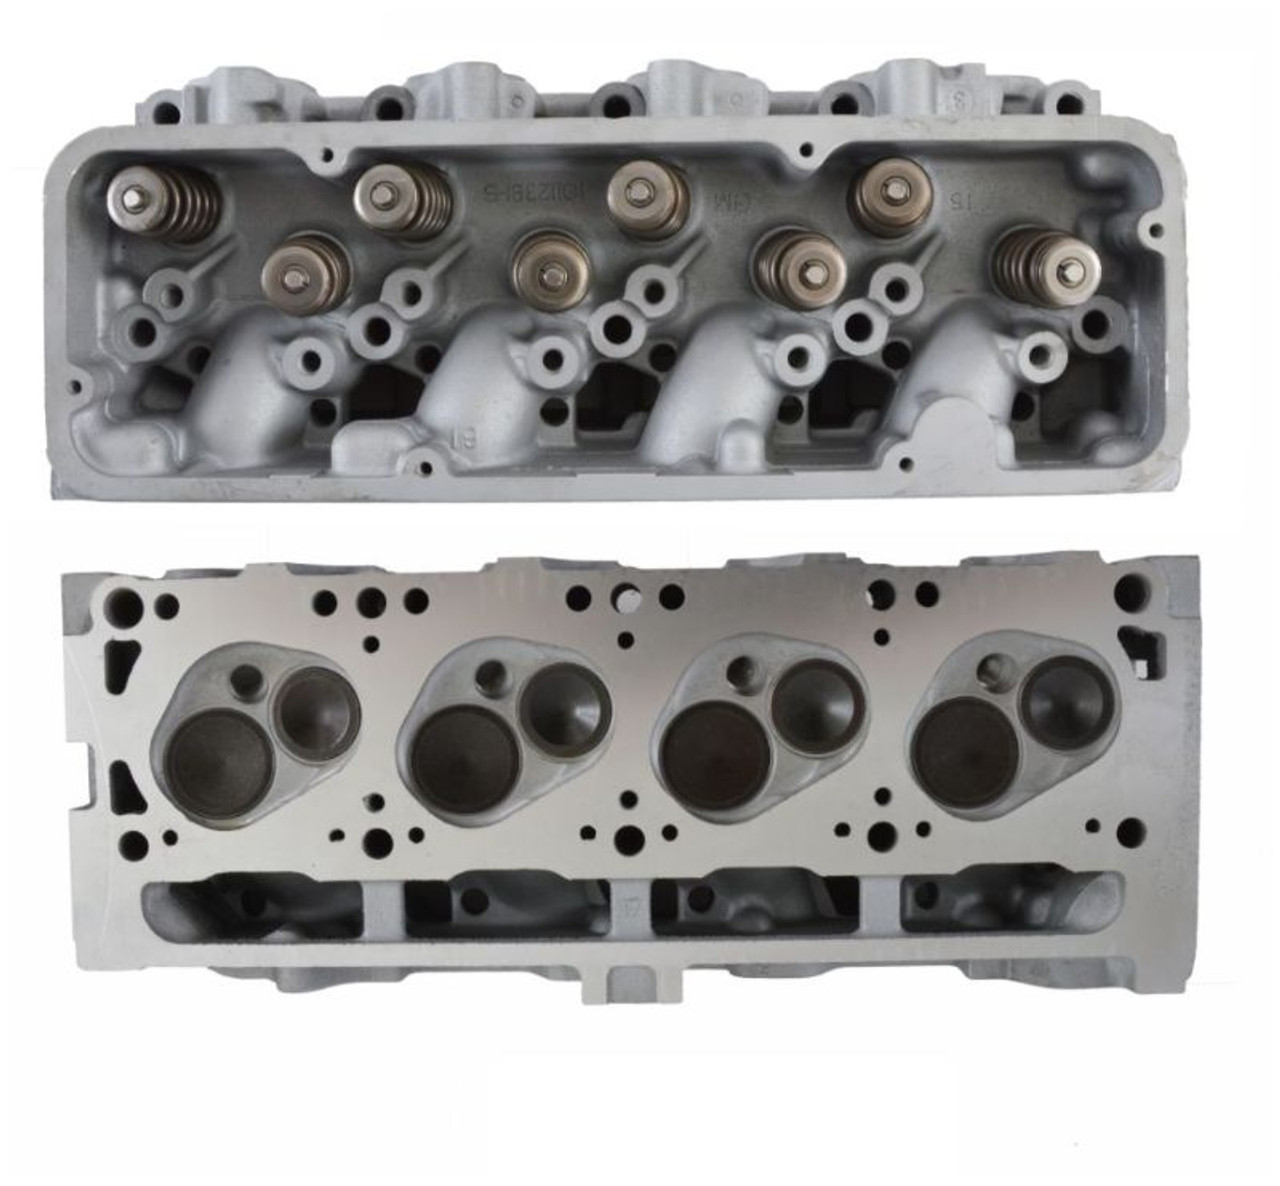 1997 Chevrolet S10 2.2L Engine Cylinder Head Assembly CH1045R -10